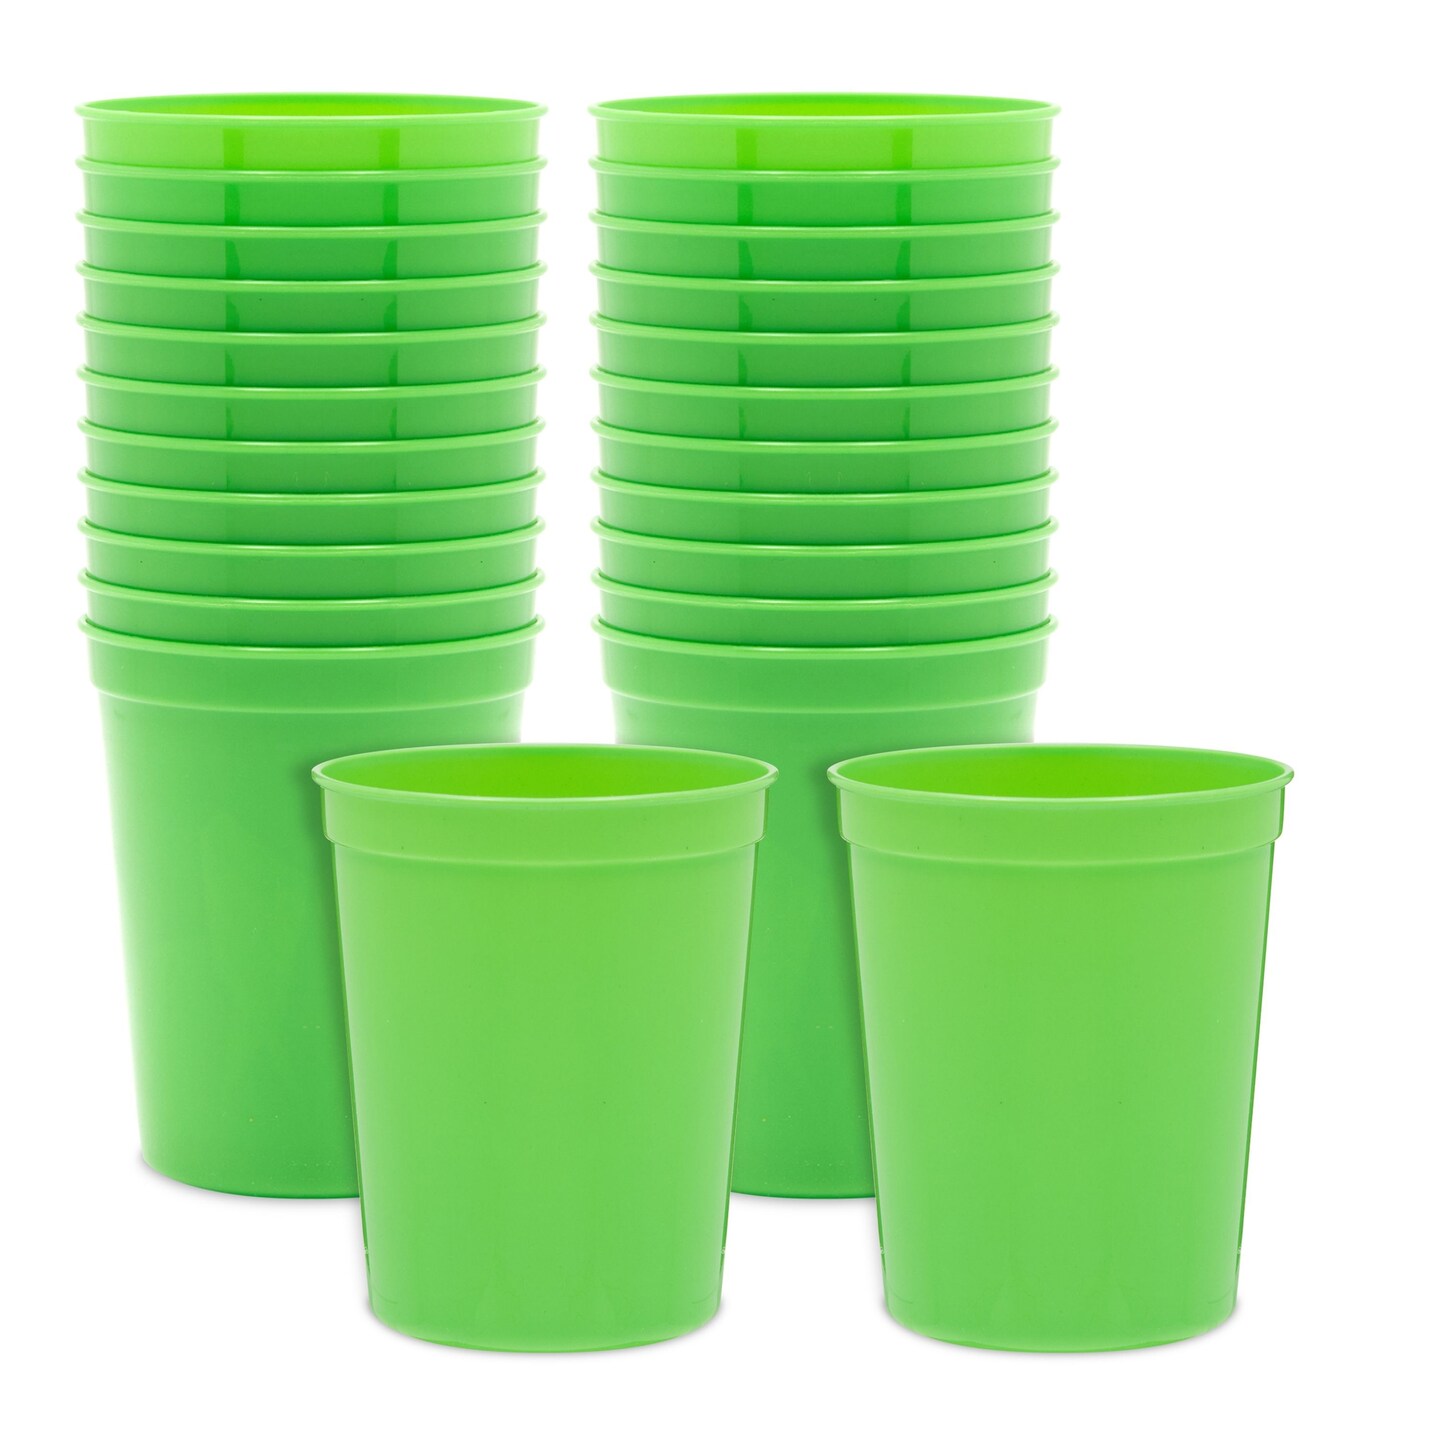 24-Pack 16-Ounce Blue Plastic Stadium Cups, Bulk Reusable Tumblers for All  Occasions and Celebrations